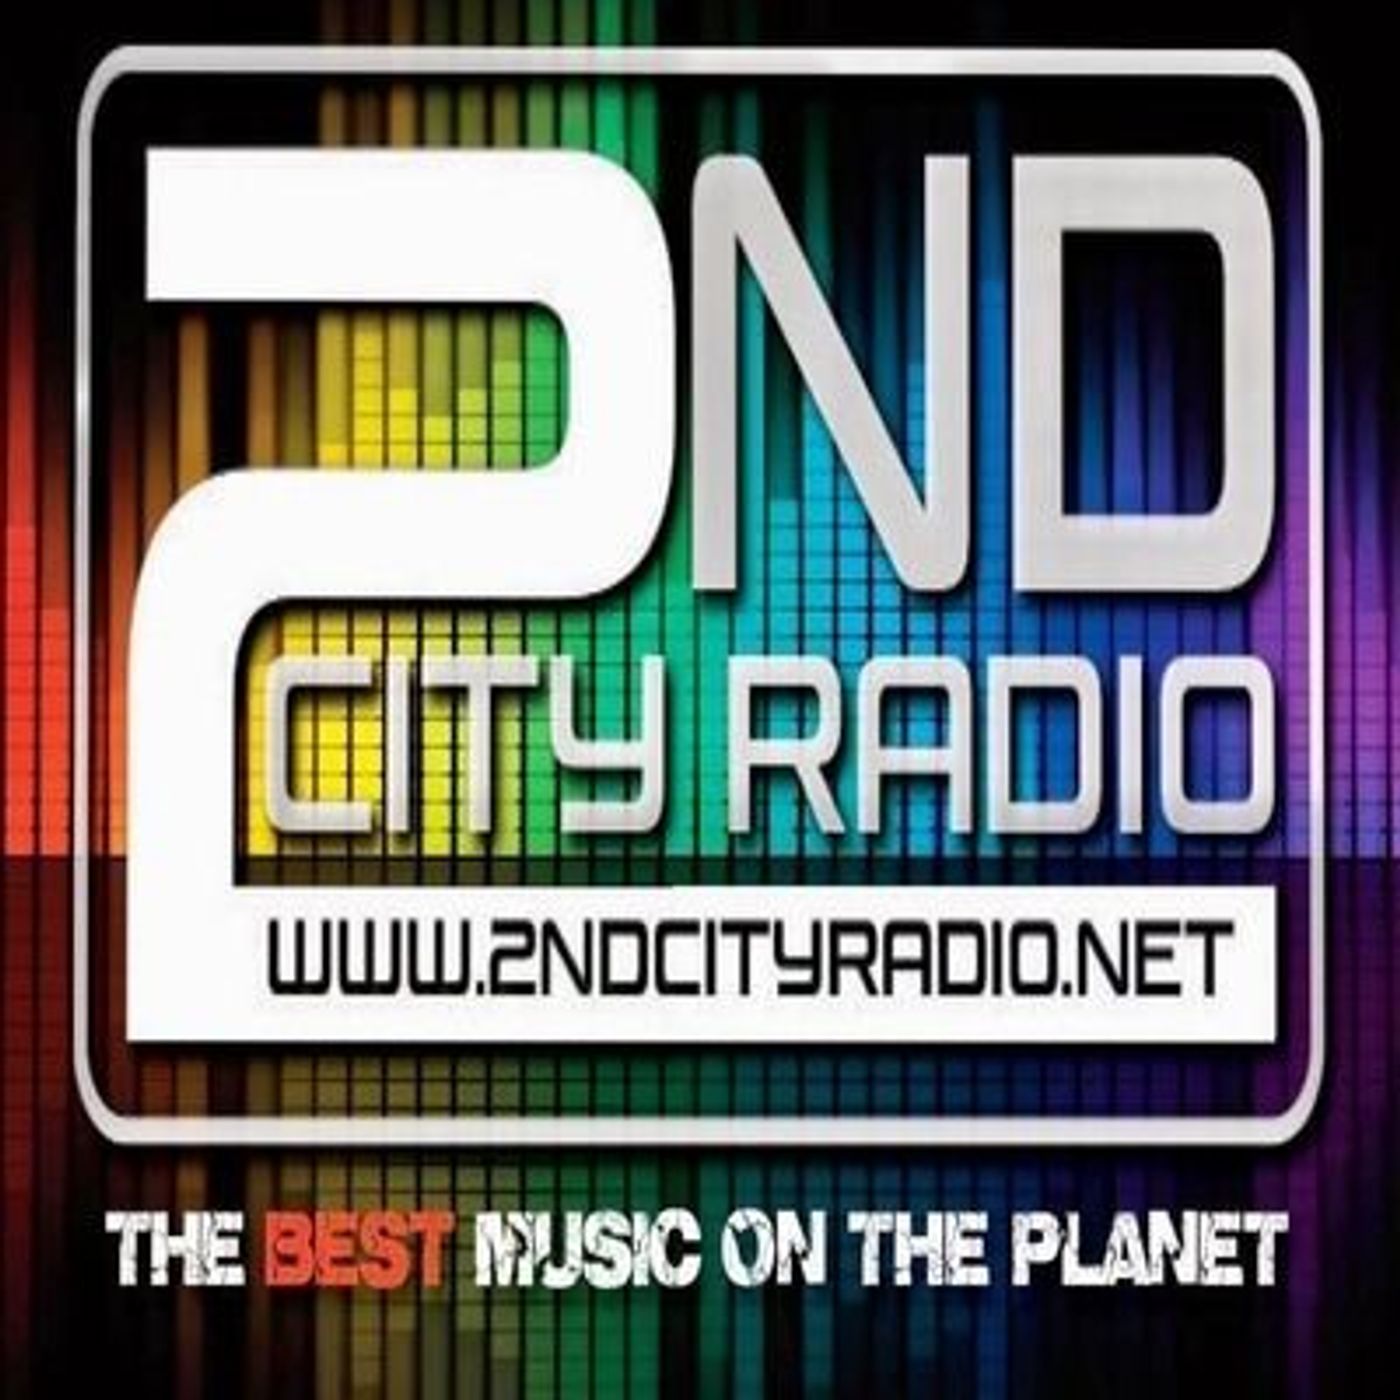 Saturday the 21st of April 2022 on 2ndcity Radio with Classic Chat